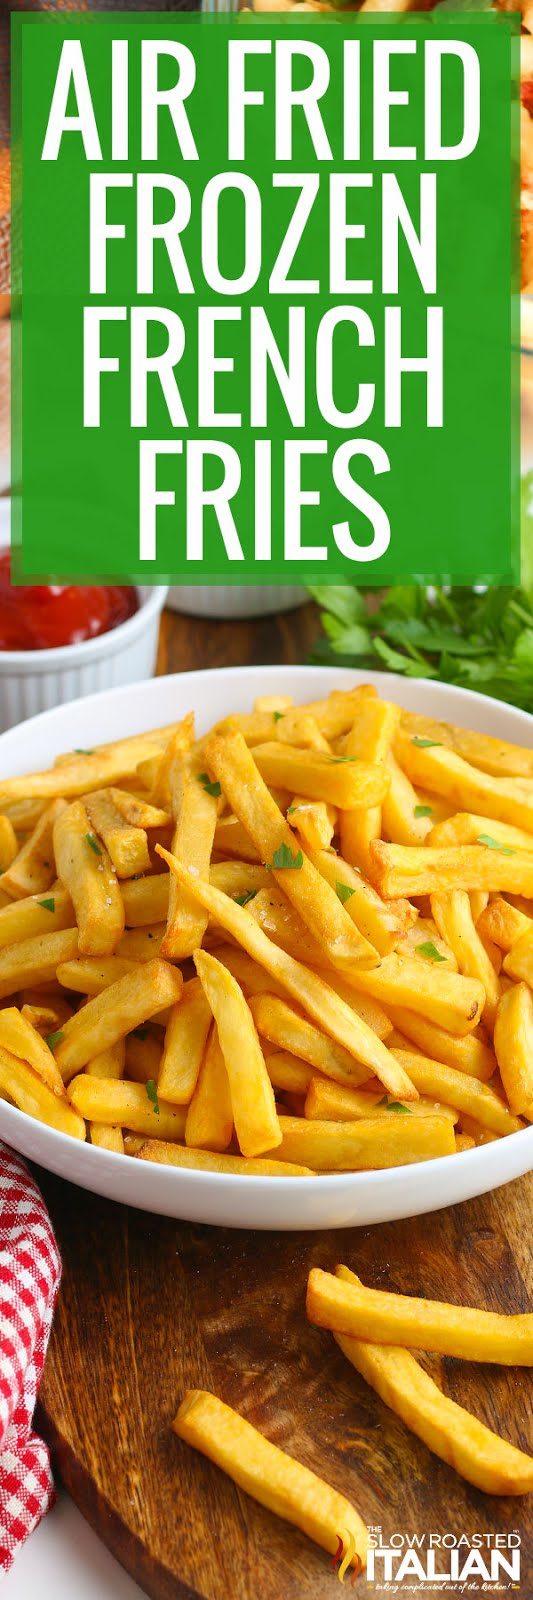 air-fried-frozen-french-fries-pin-6642782